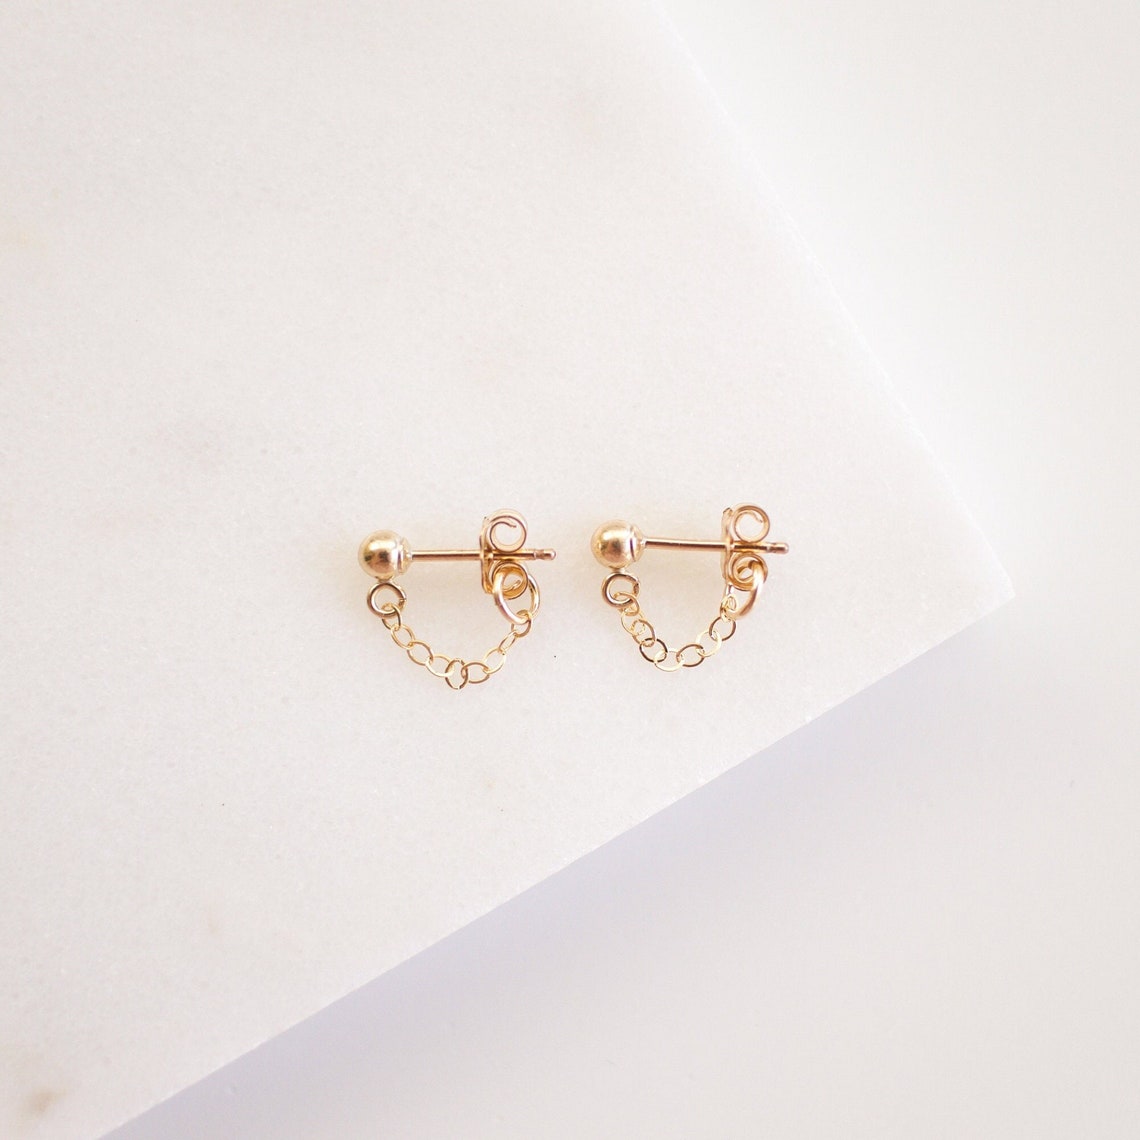 Chain Cuff Earrings Gold Rose Gold or Silver Dainty Studs - Etsy